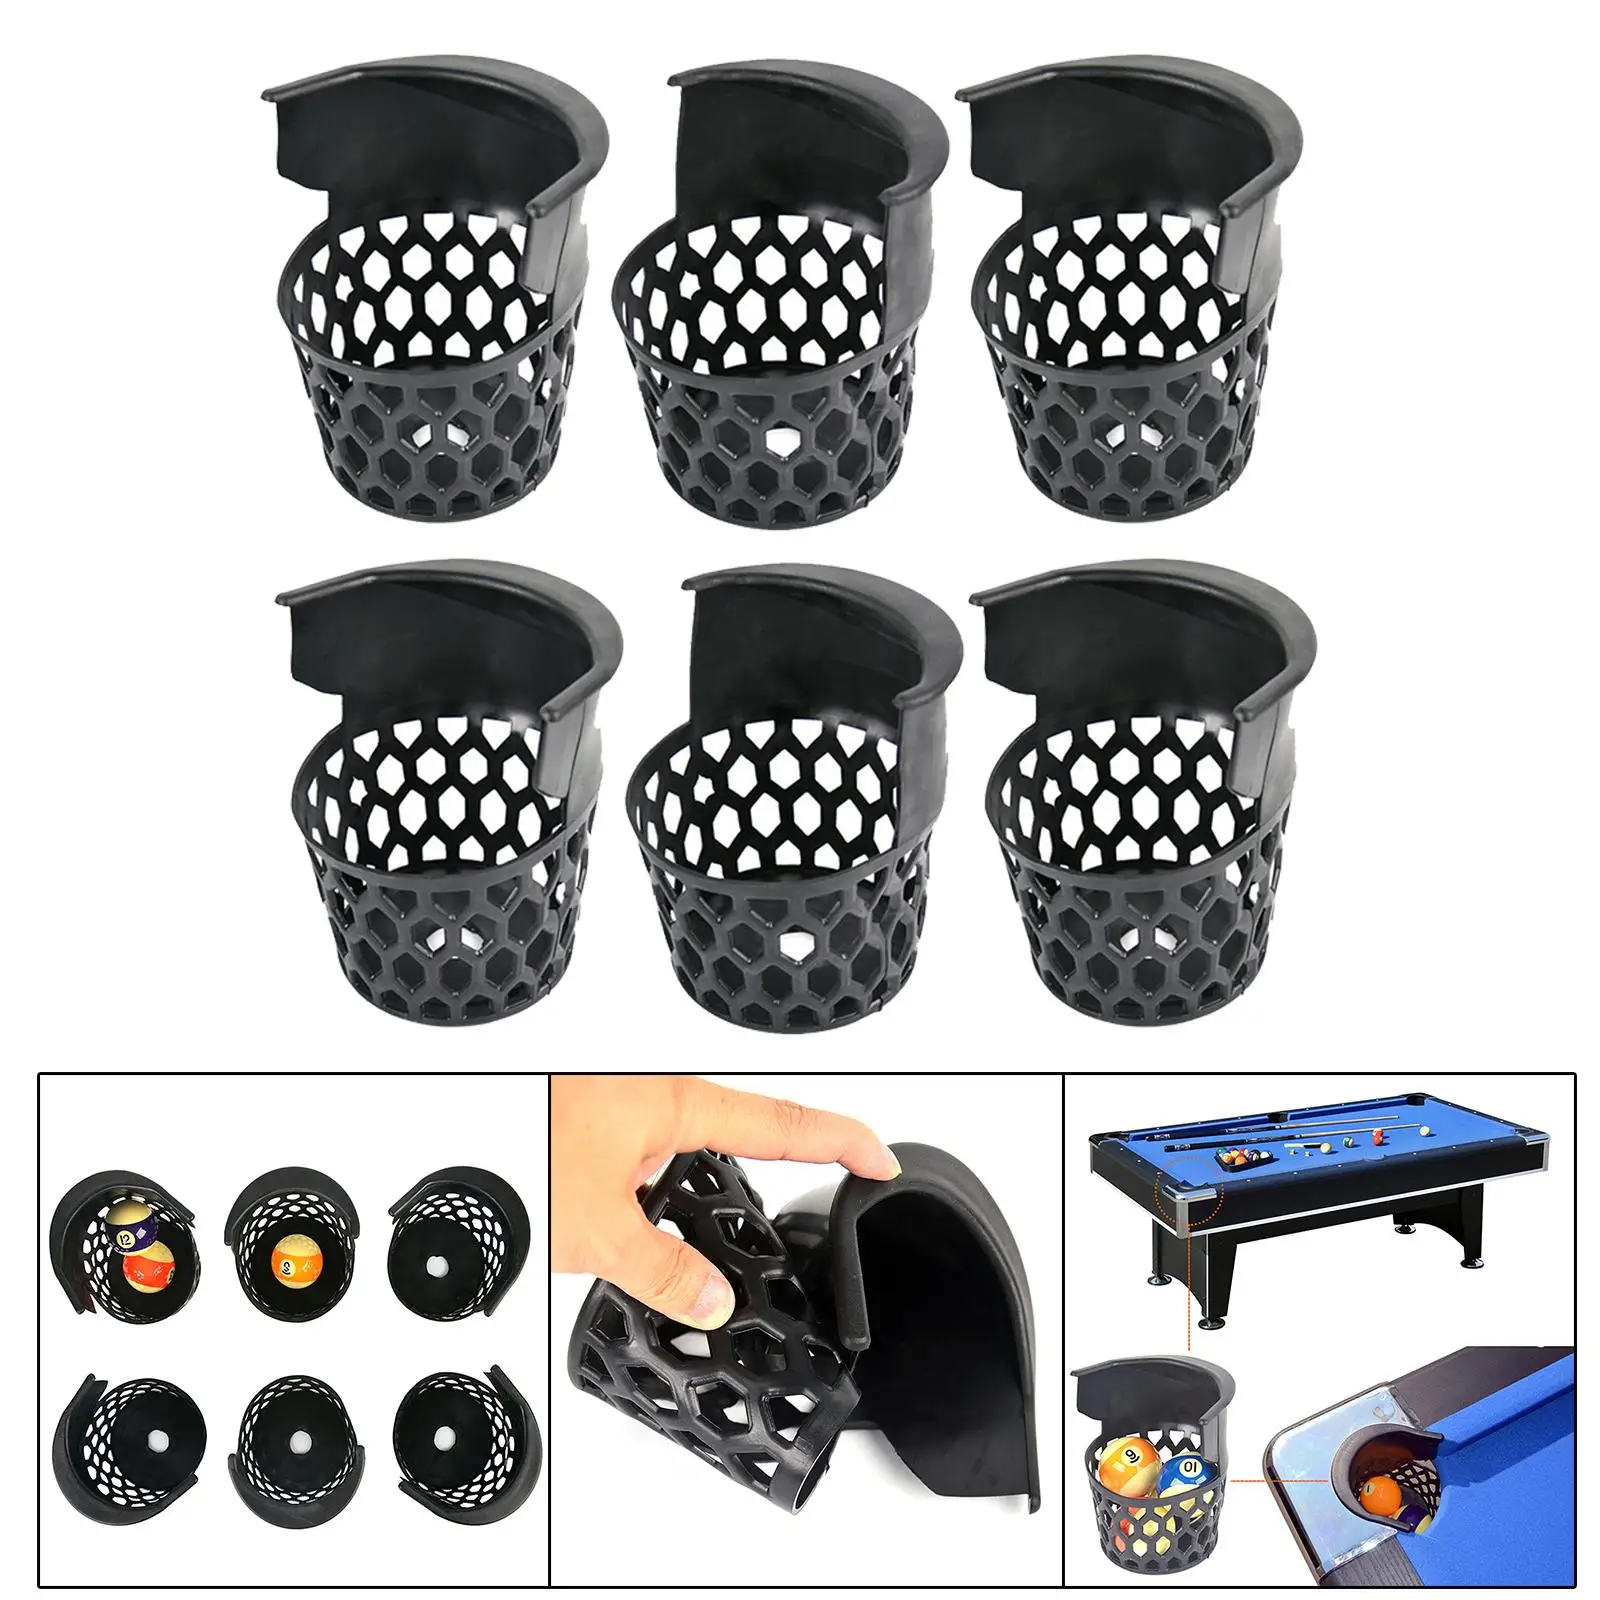 6x Pool Table Billiard Pockets Set Pool Table Drop Nets Storage with 12 Screws Premium Snooker Baskets Replacement Pockets